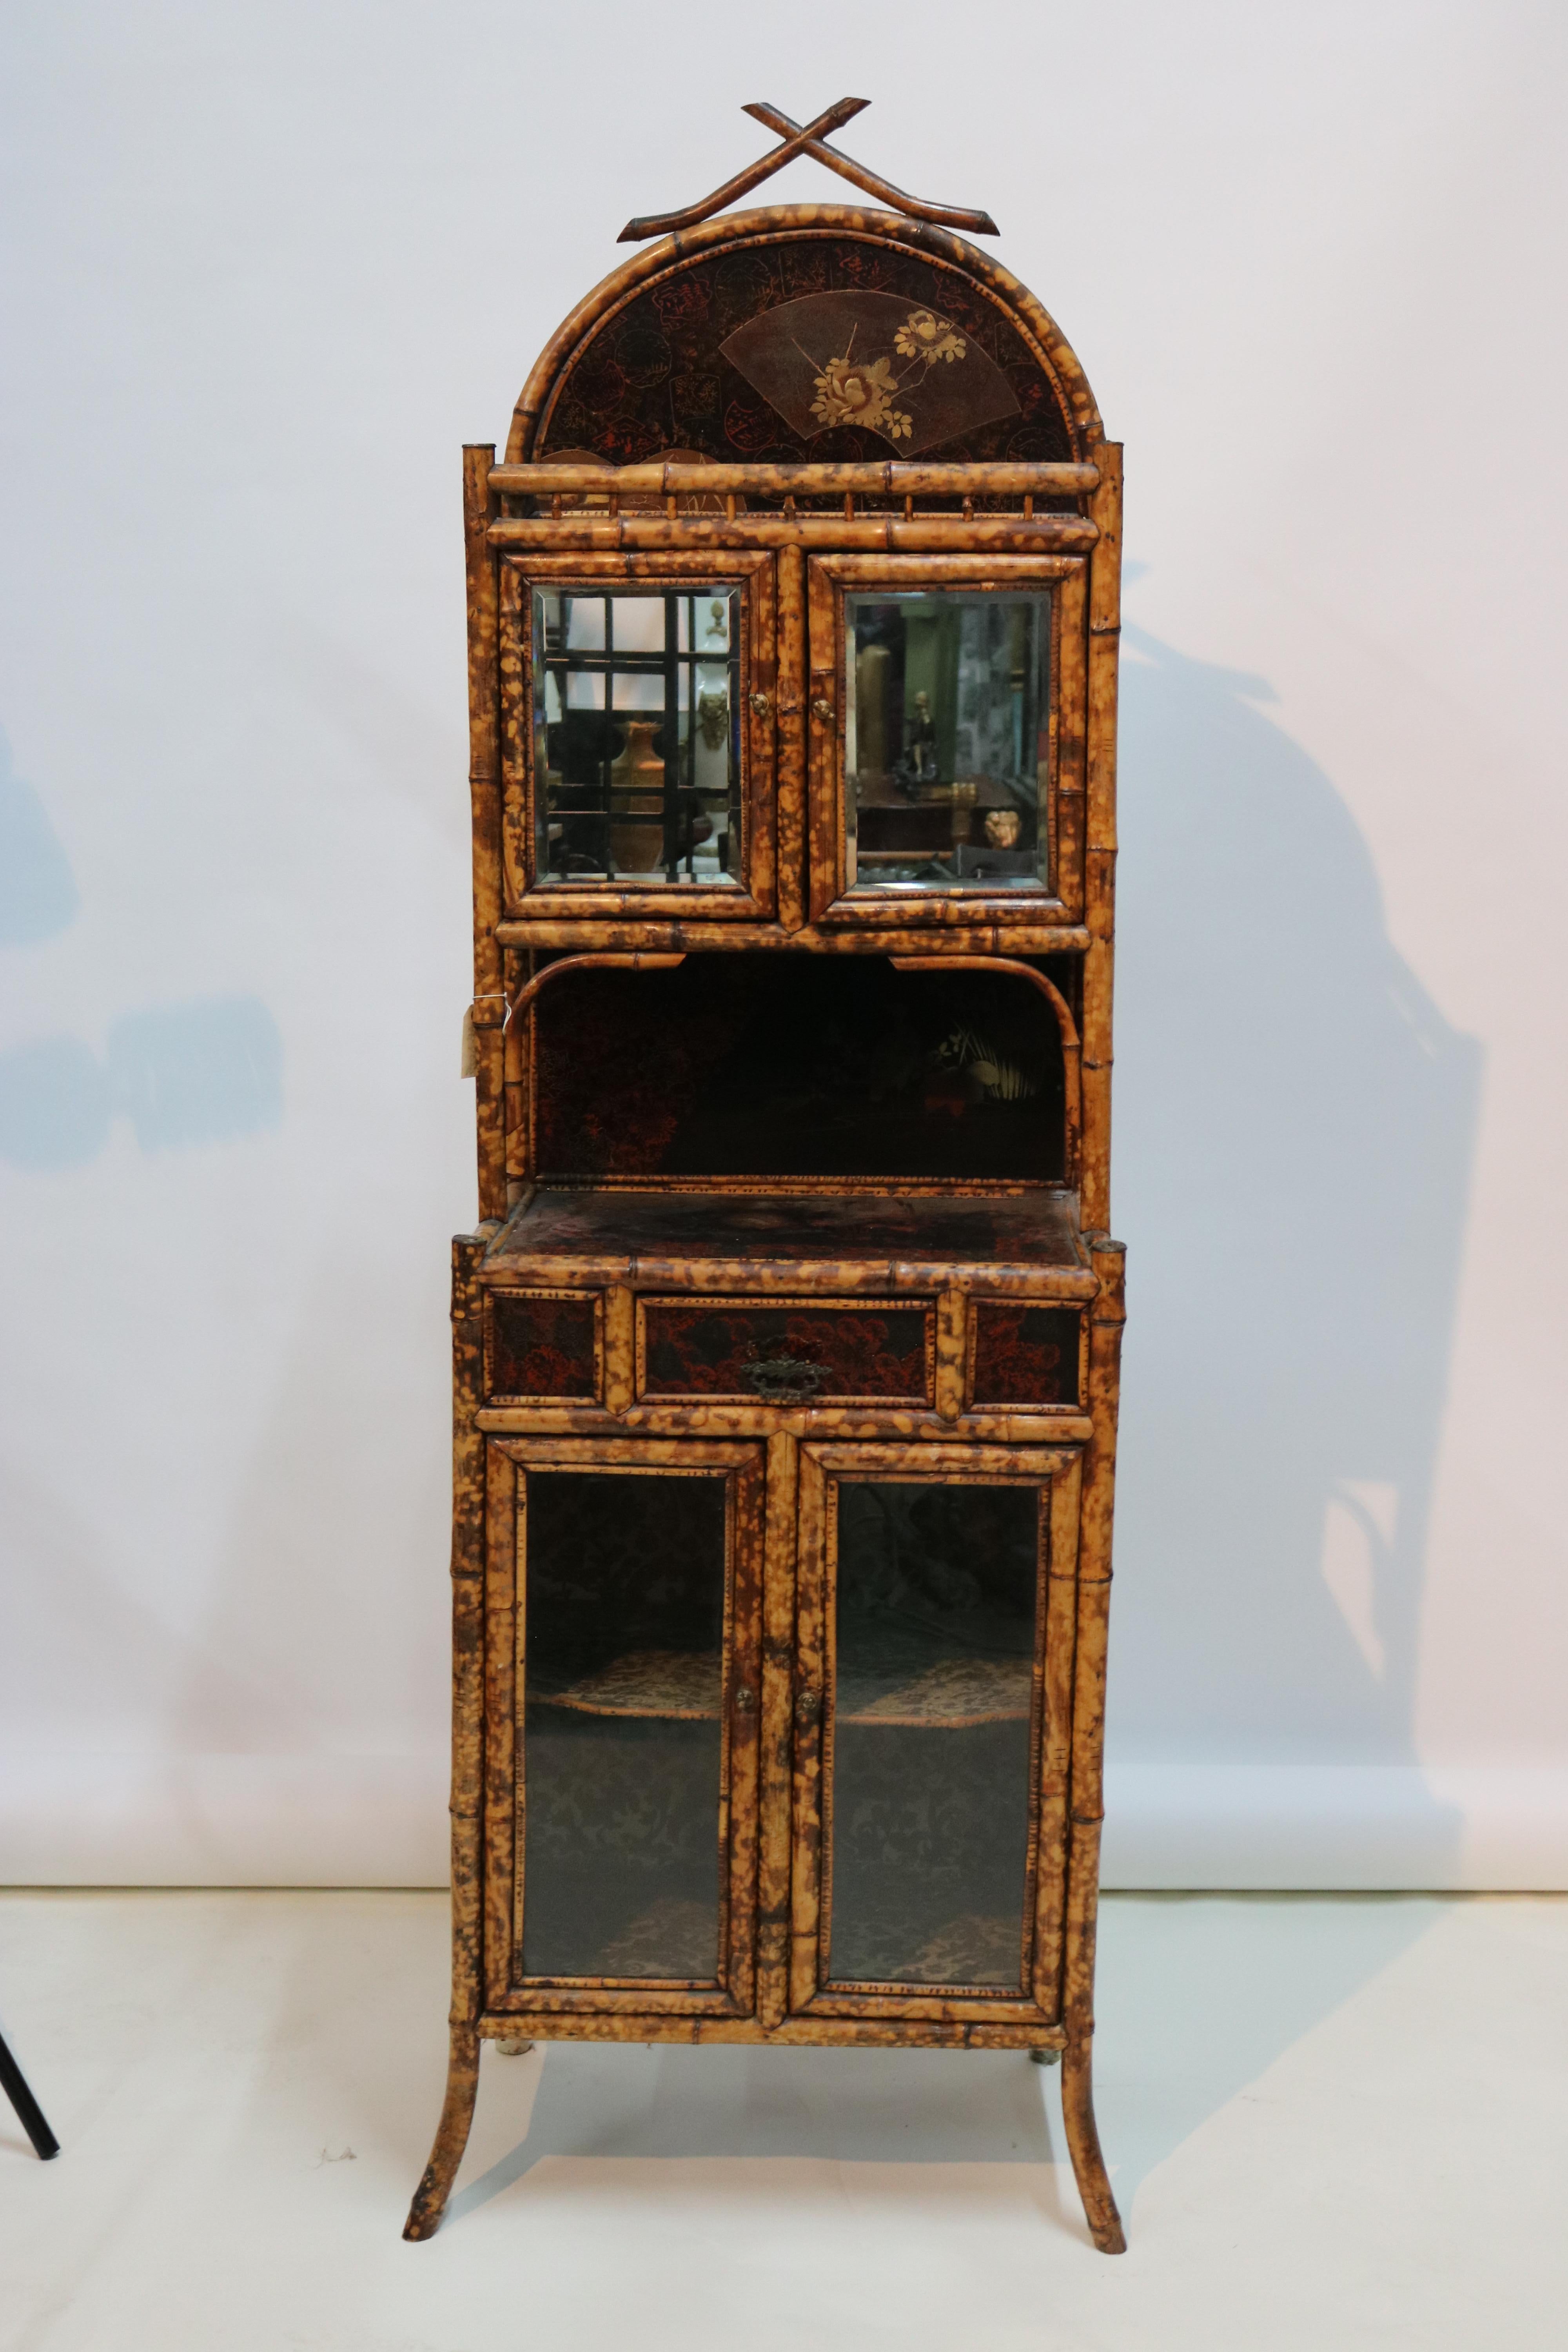 A large 1880s English bamboo cabinet featuring an upper tier with an Aesthetic Movement design of lacquered panels and fretwork with a pair of rectangular beveled mirrored doors with interior shelf,, over a cabinet lower tier with fine Japan